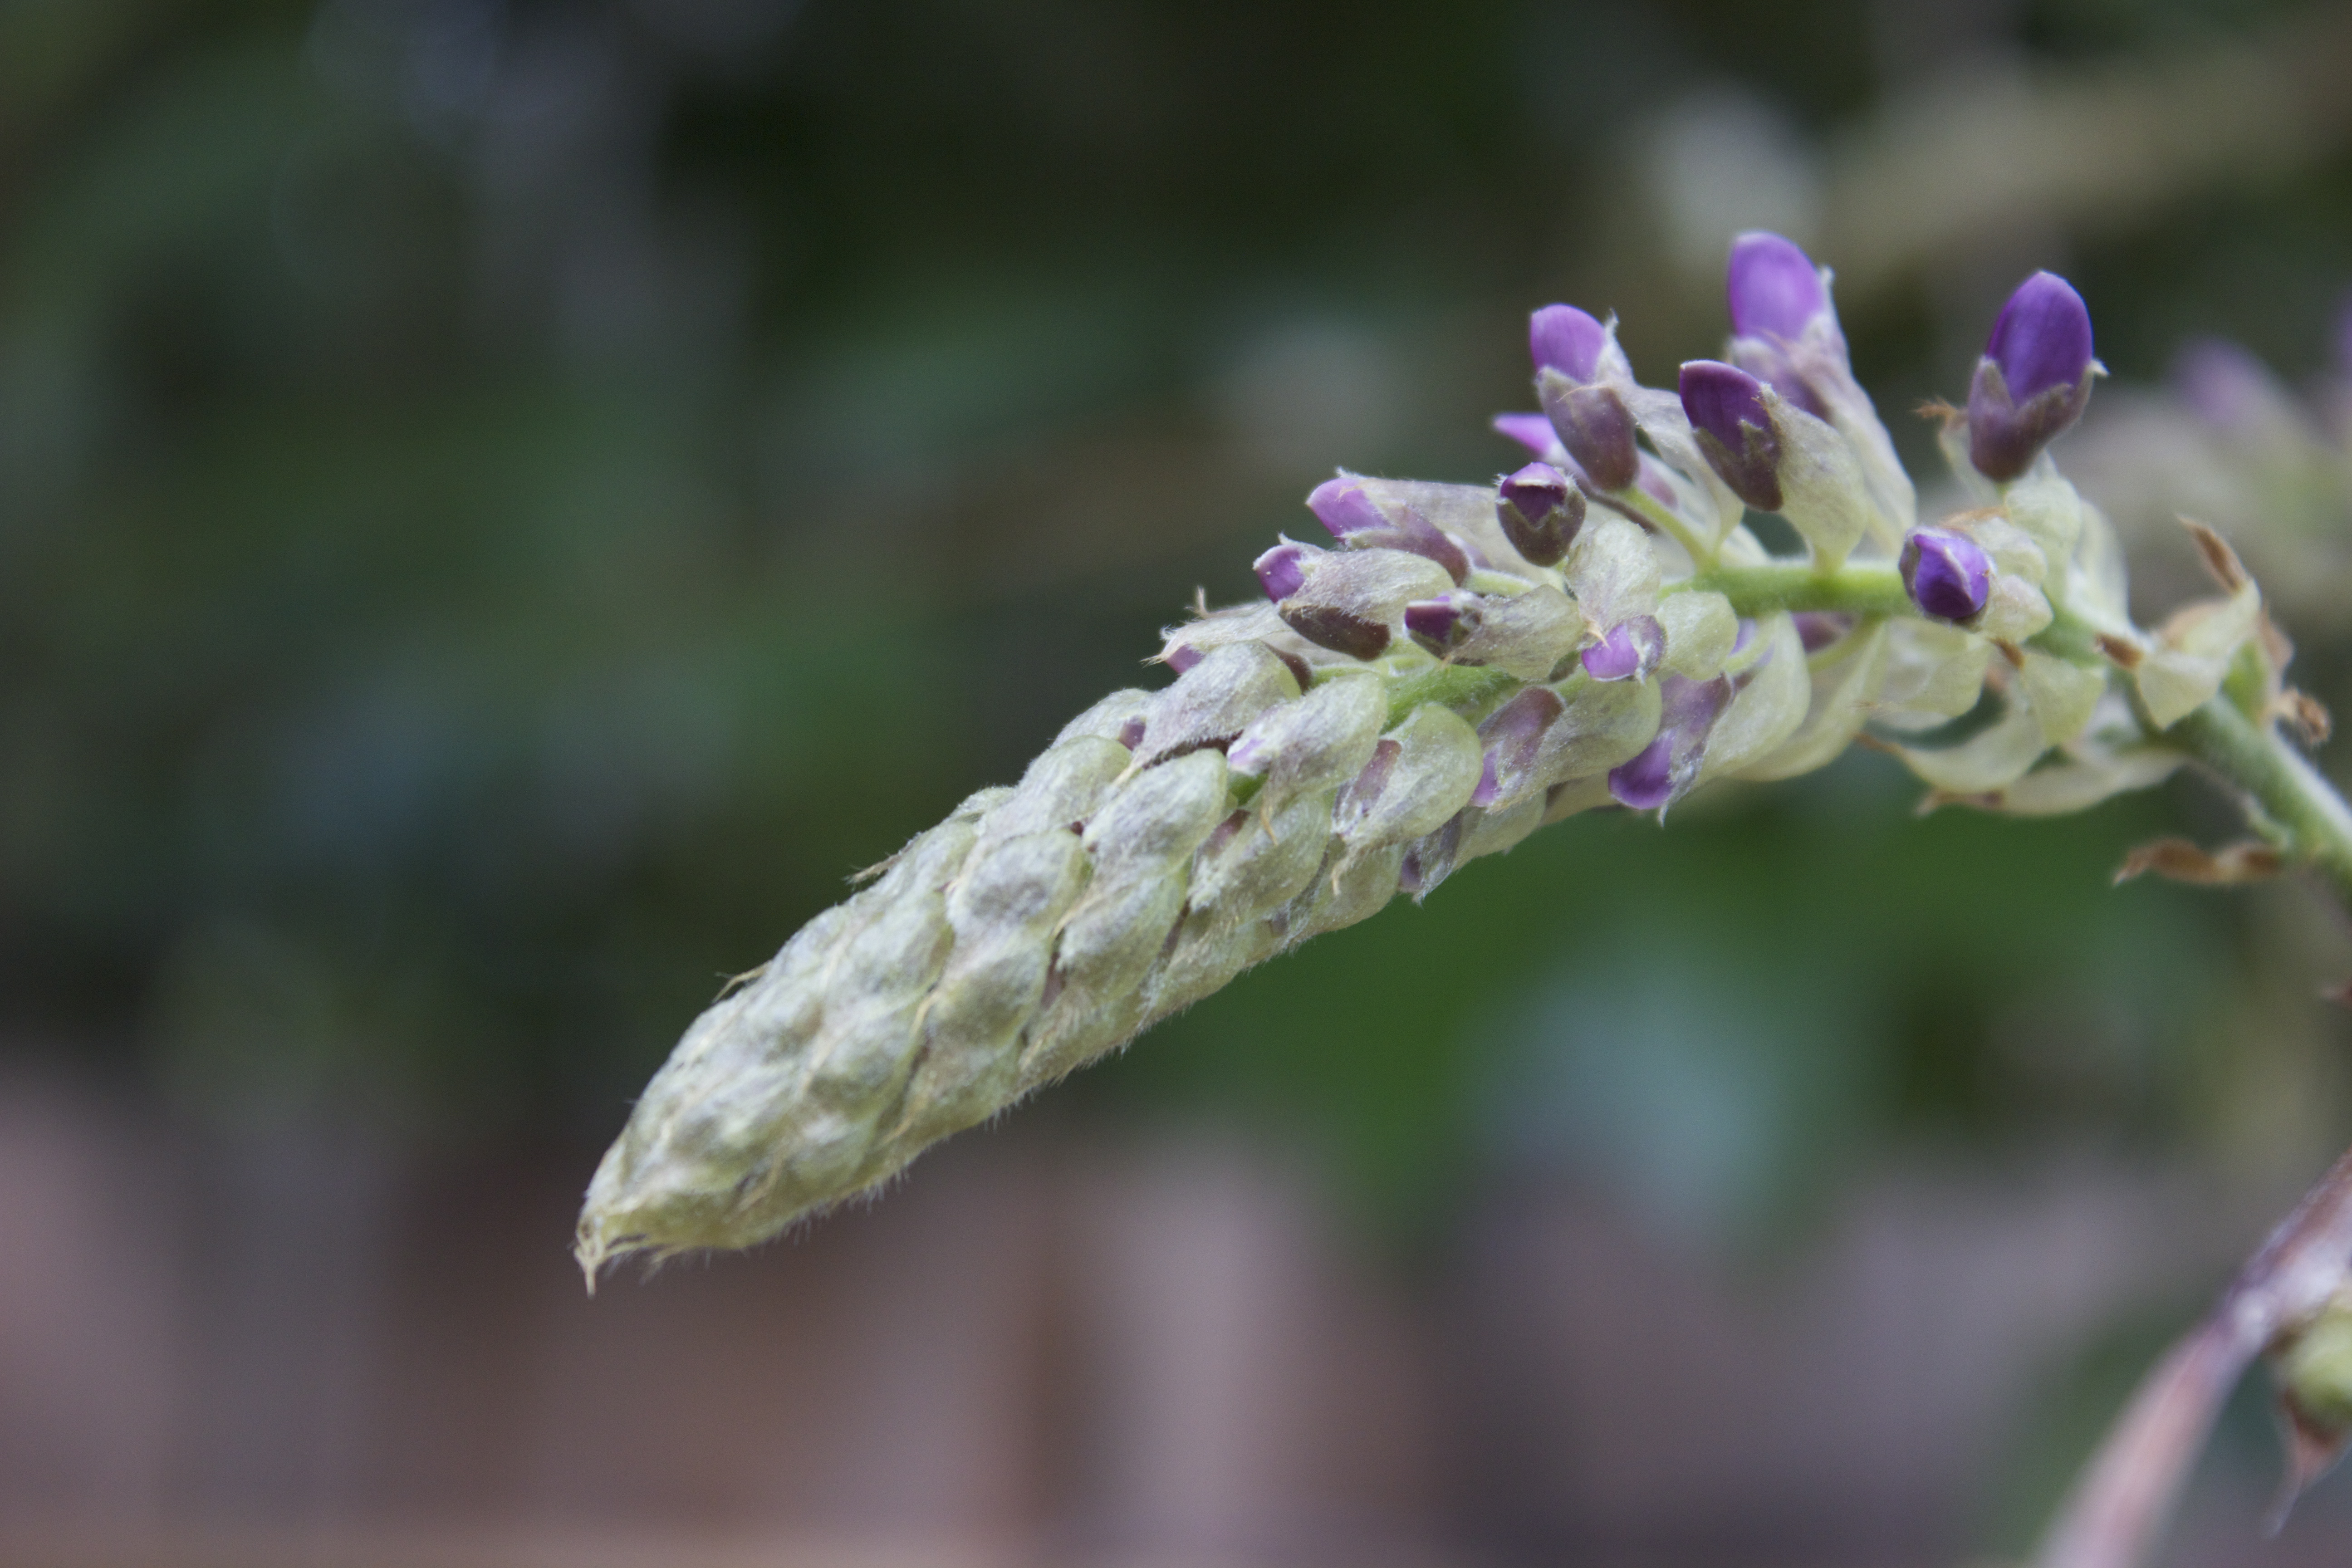 Closeup of green and purple wisteria flower buds against a blurred green background.